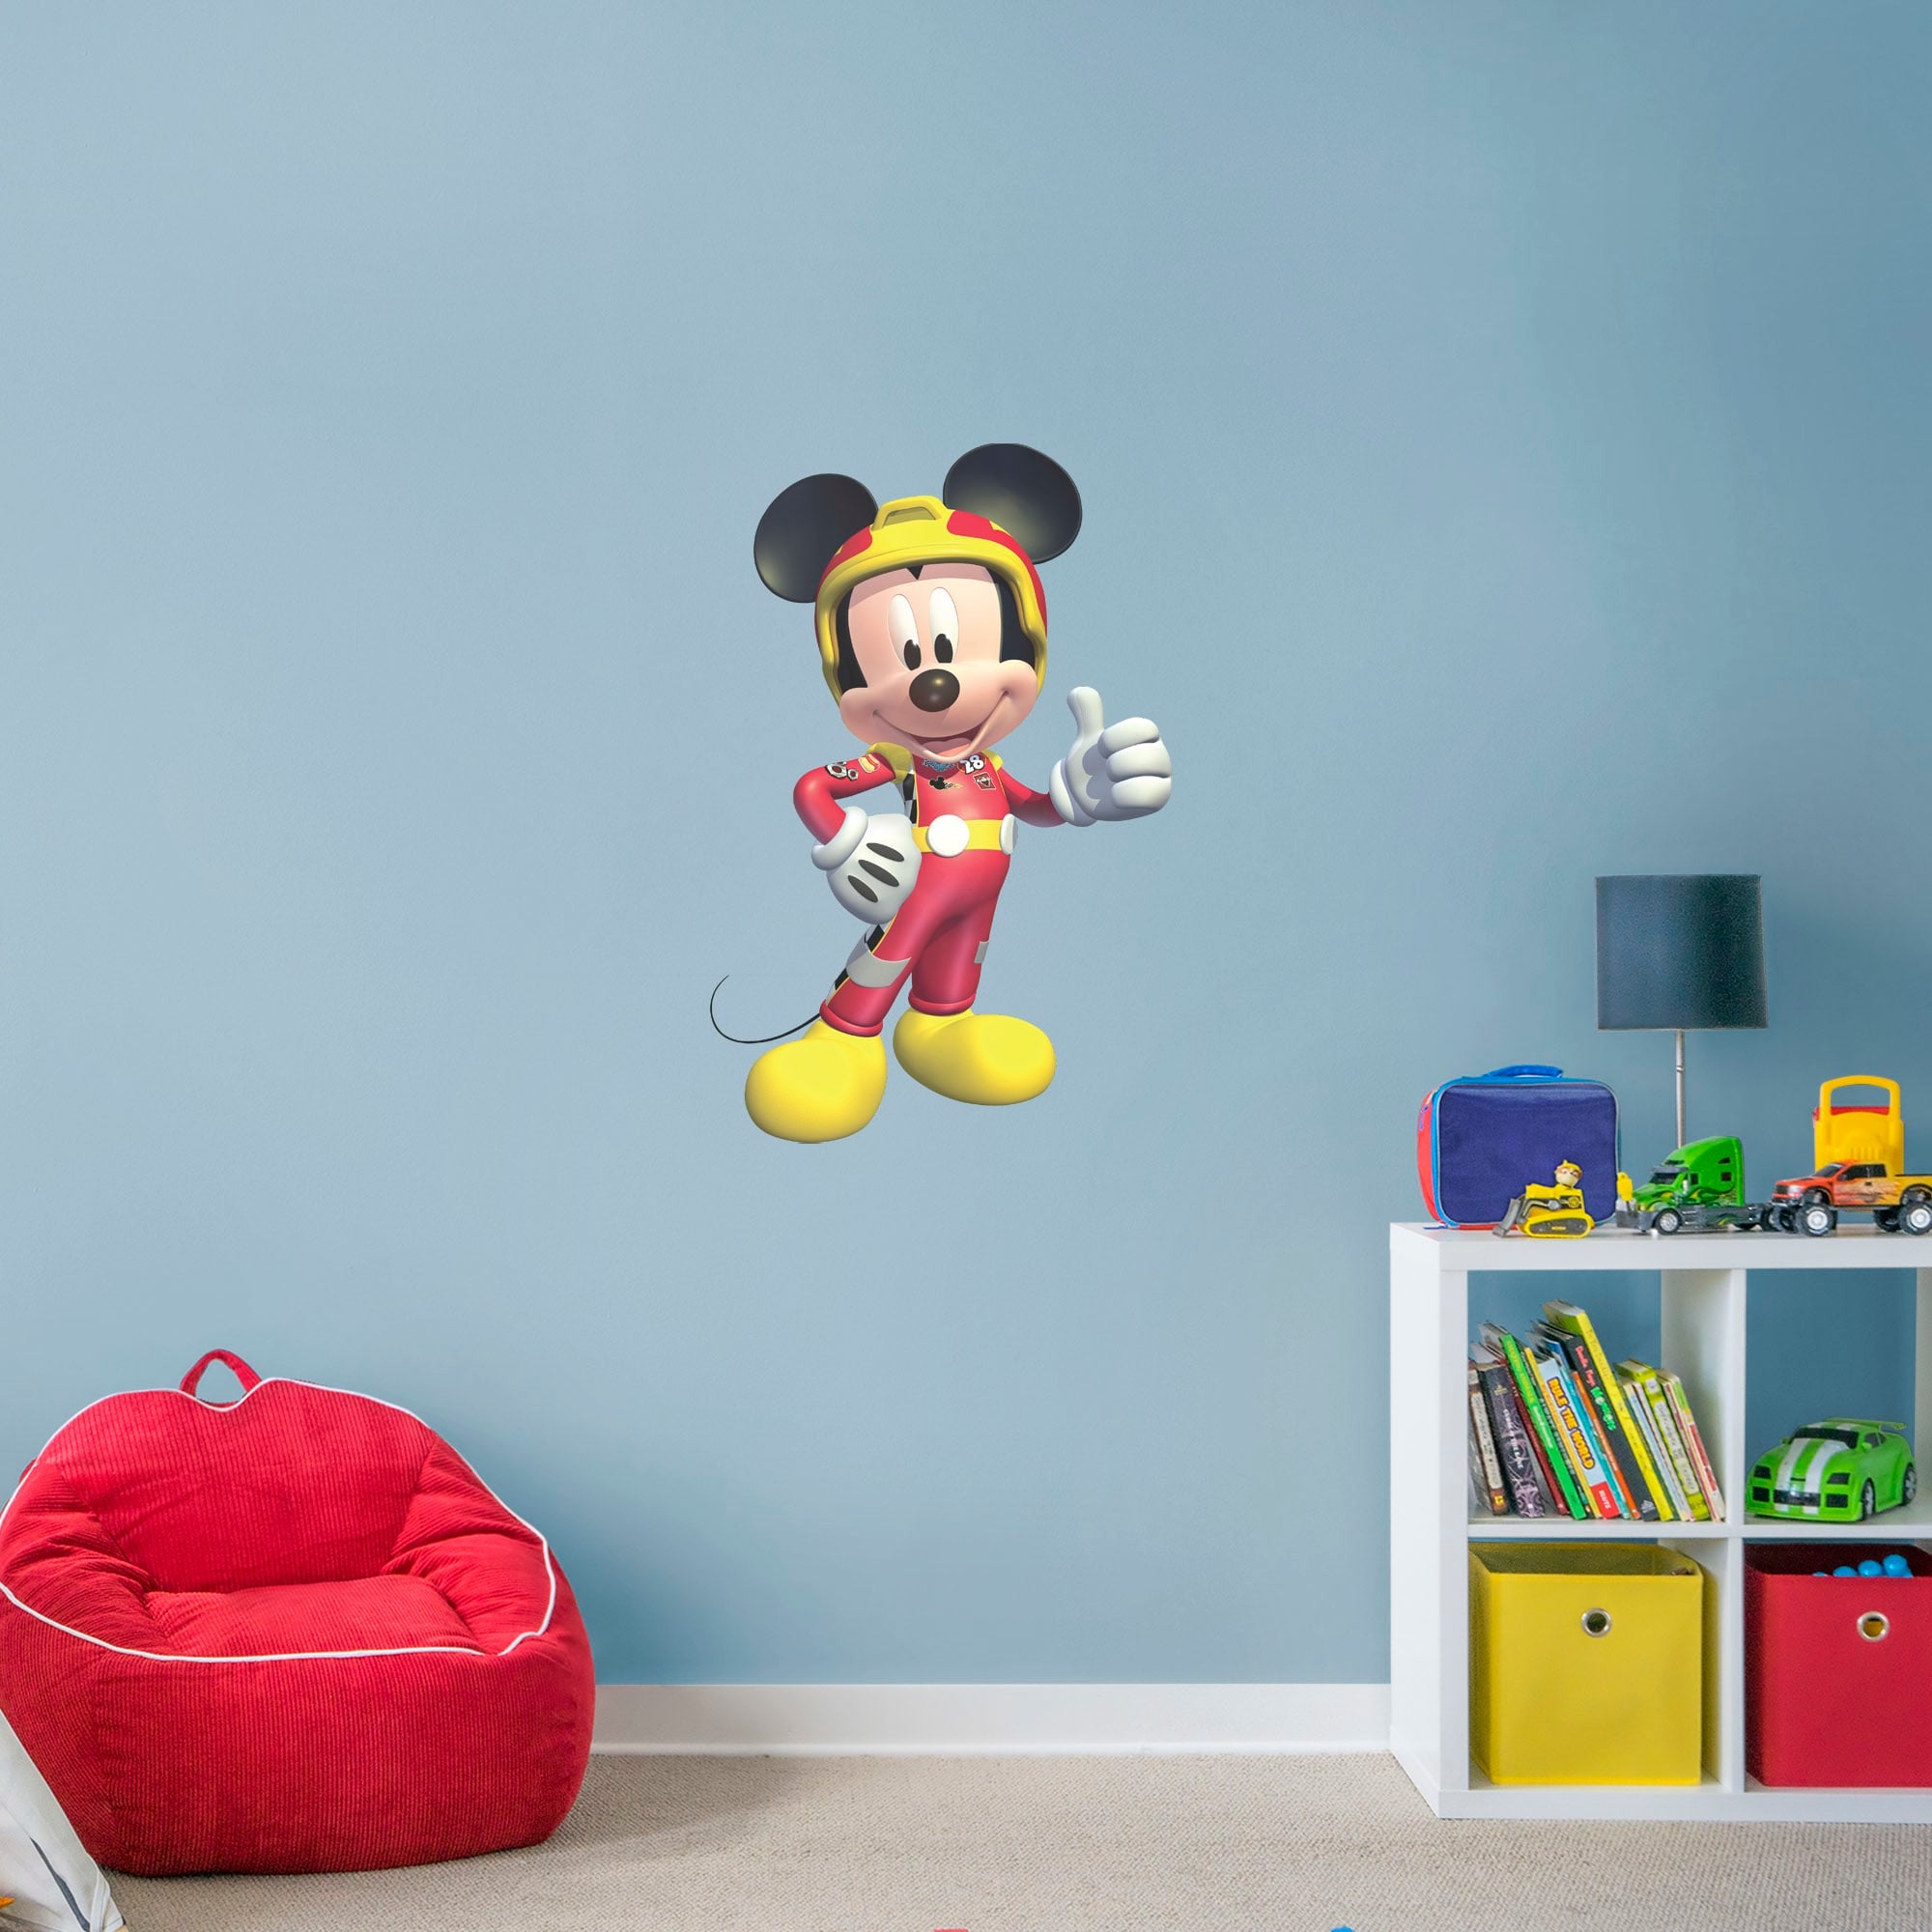 Mickey and the Roadster Racers: Mickey Mouse - Officially Licensed Disney Removable Wall Decal XL by Fathead | Vinyl